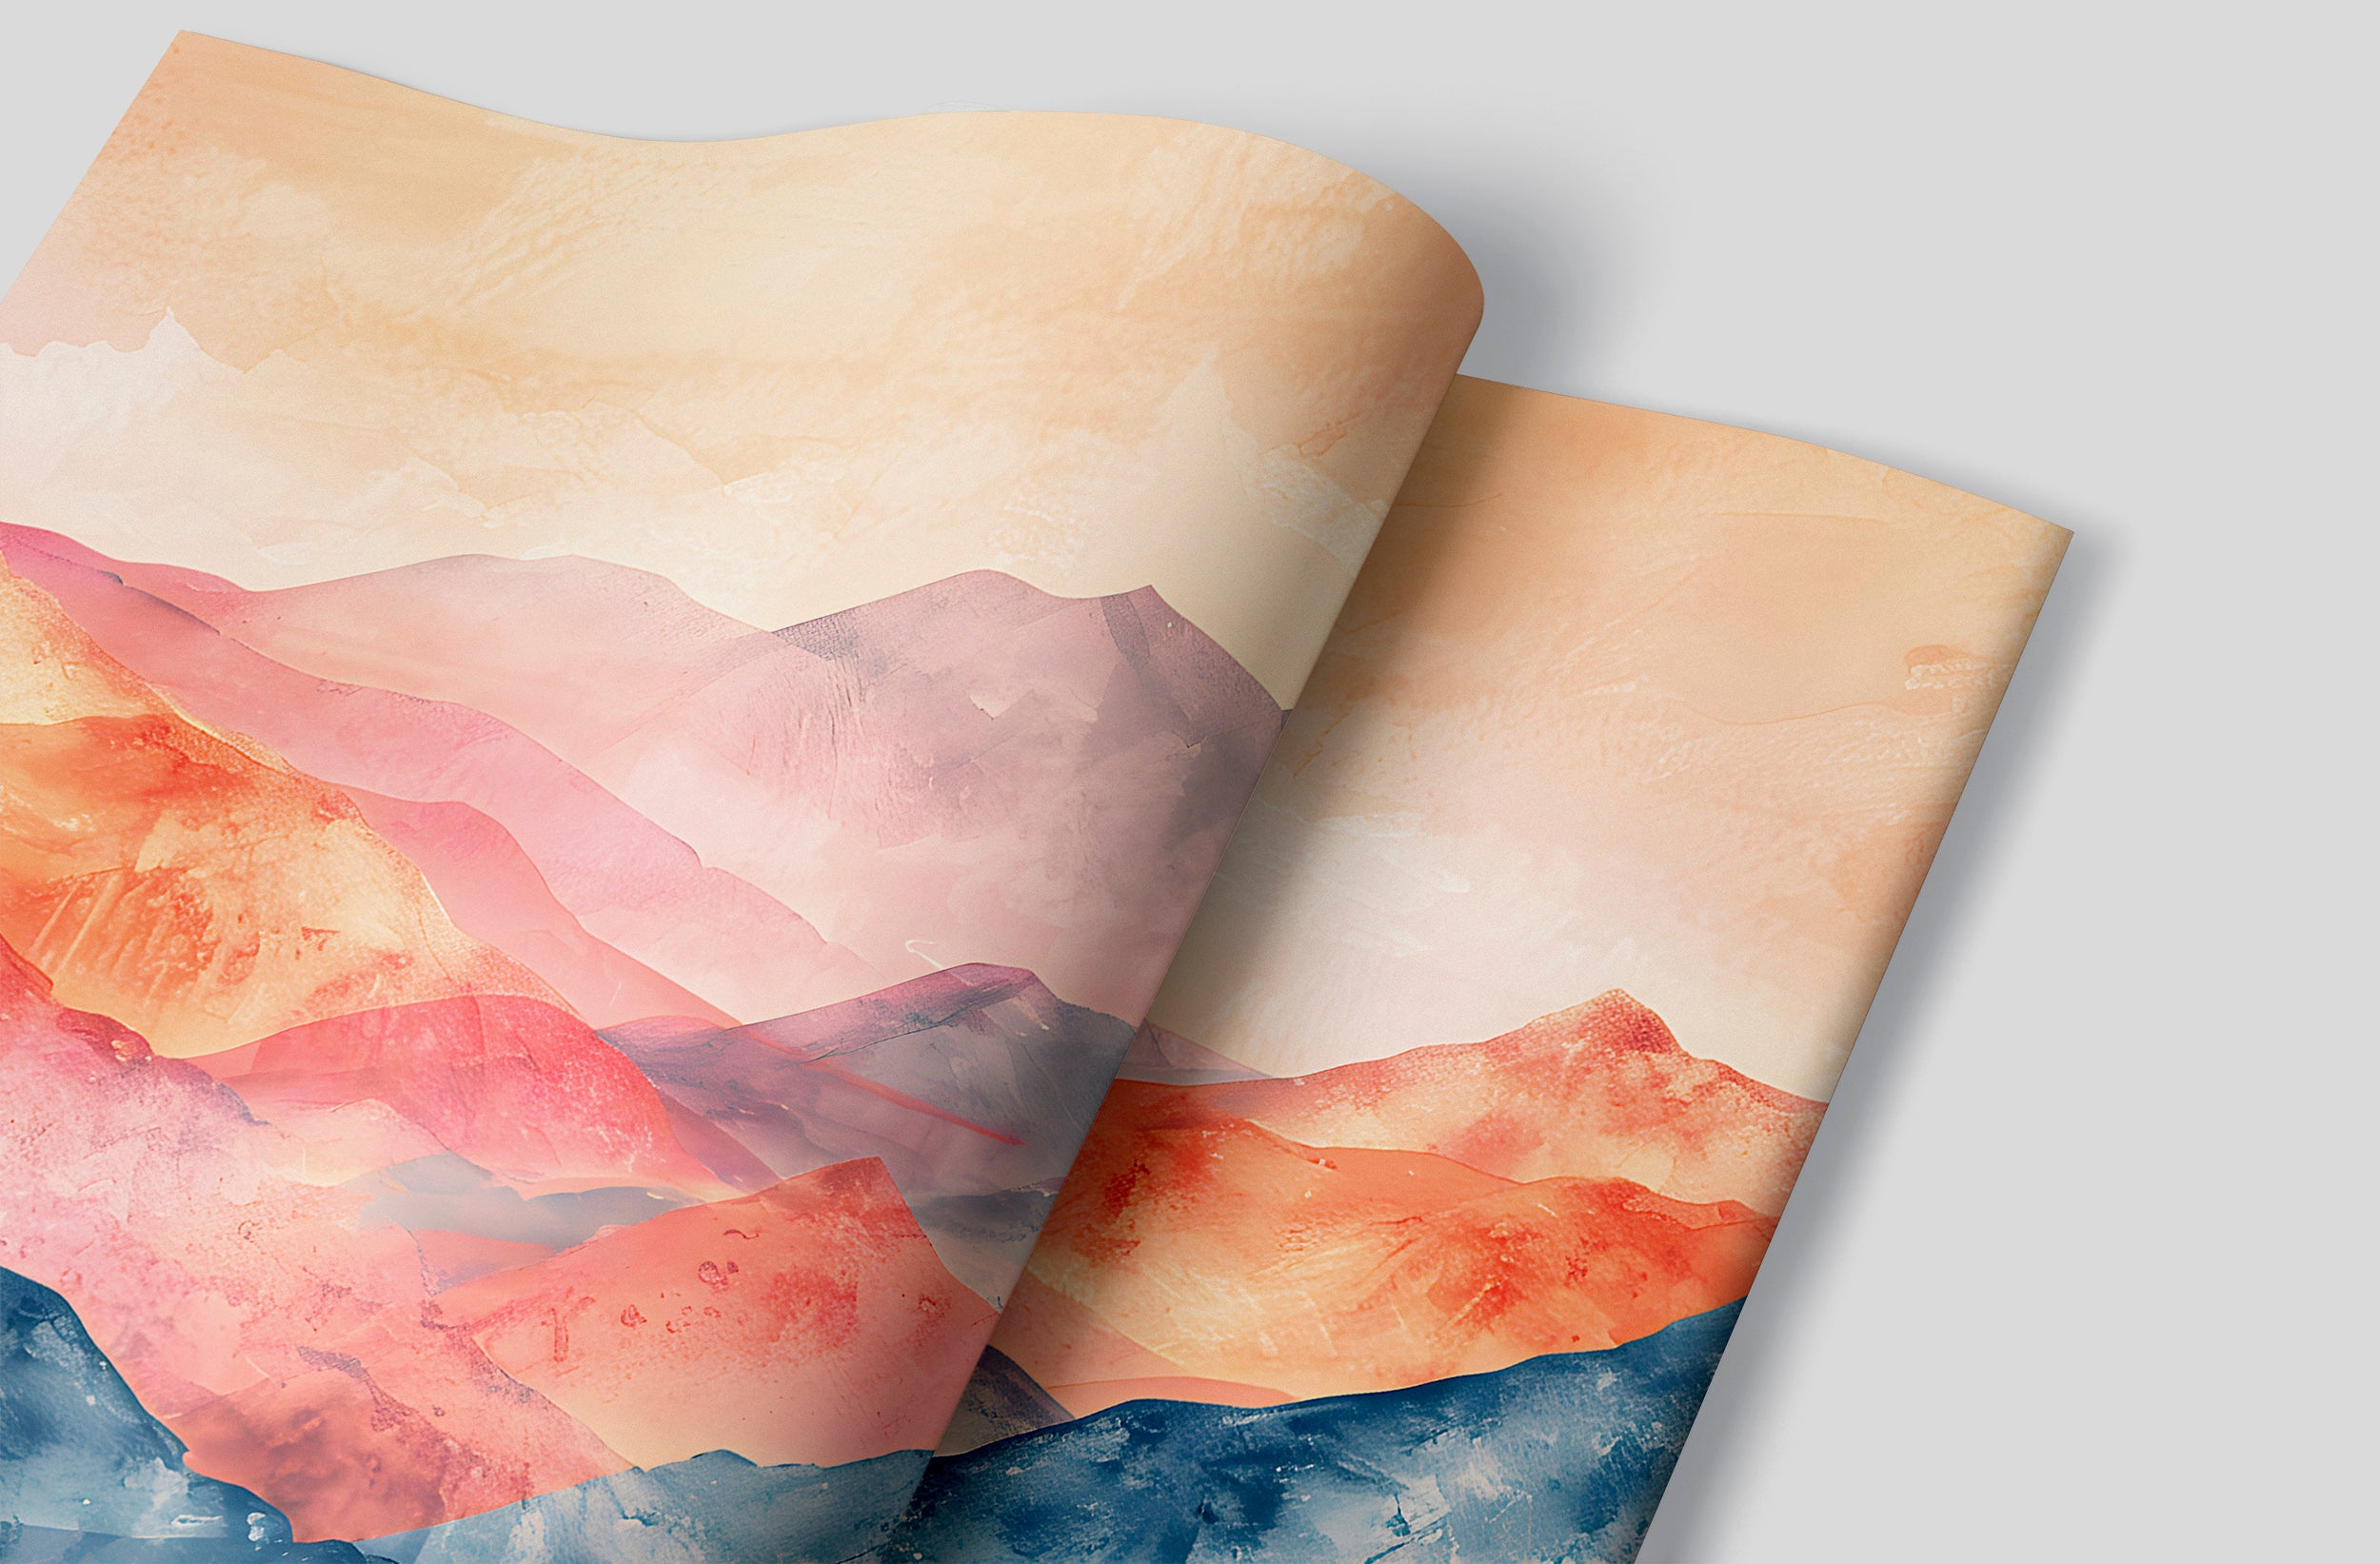 Abstract Mountains Mural, Colorful Peel and Stick Mountain Landscape Wallpaper, Watercolor Modern Style Removable Wall Mural, Custom Size Art